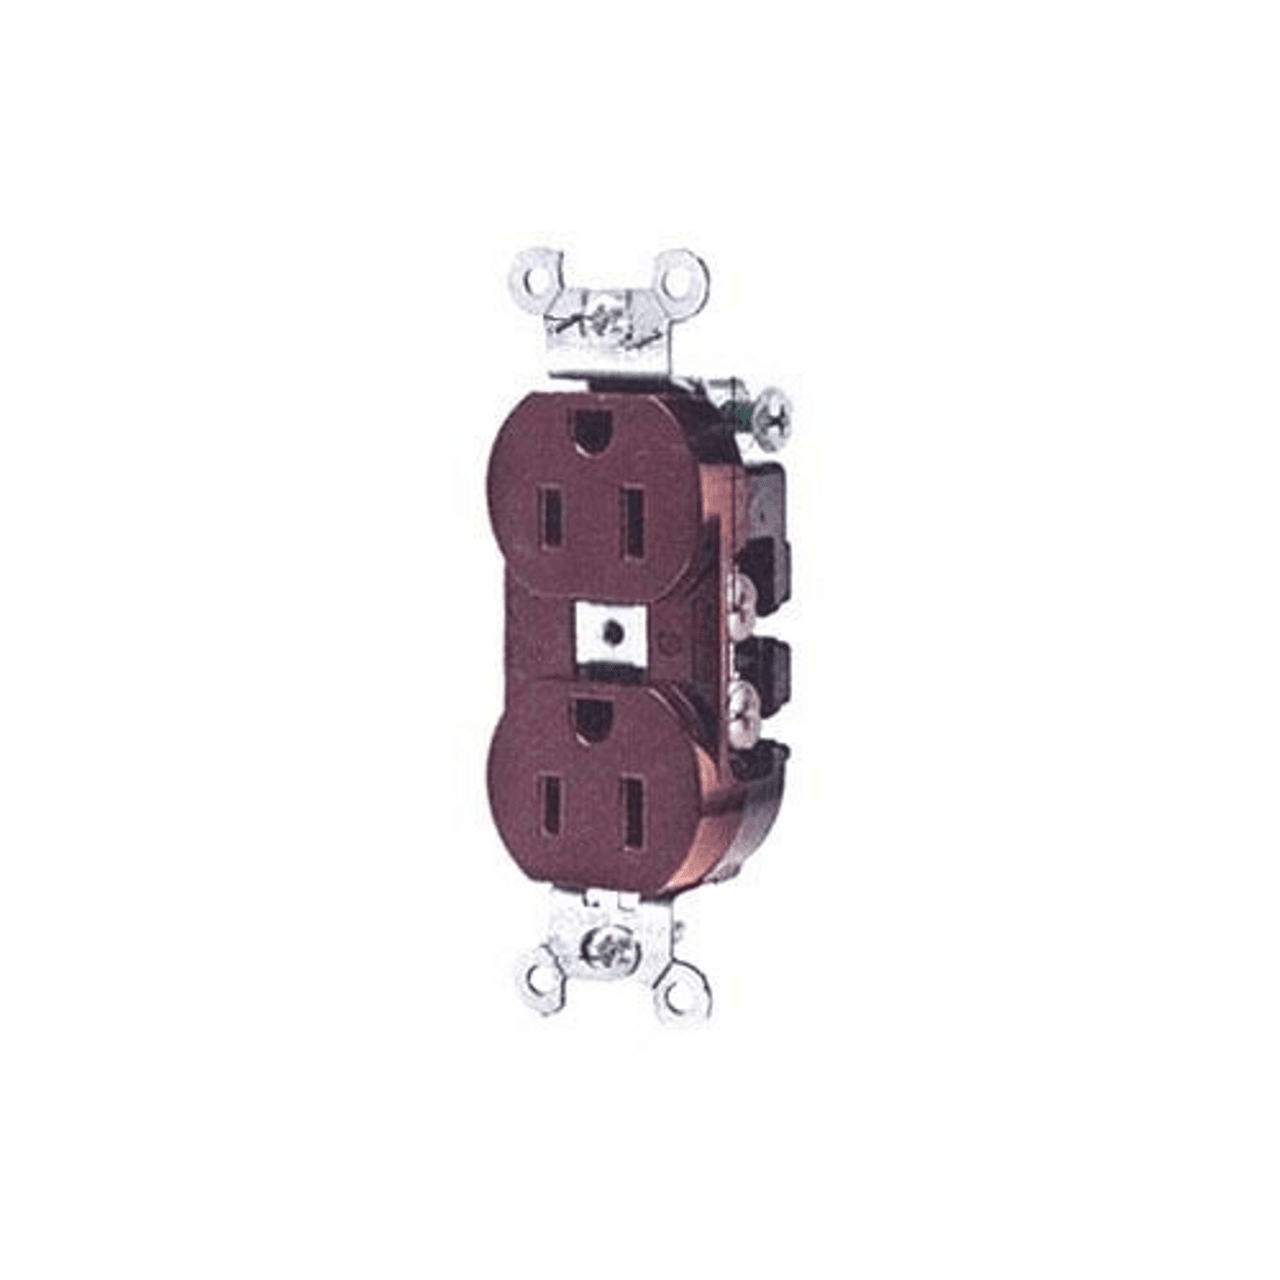 Hubbell CR5352BK Hubbell CR5352BK Surge Protection Devices (SPDs)